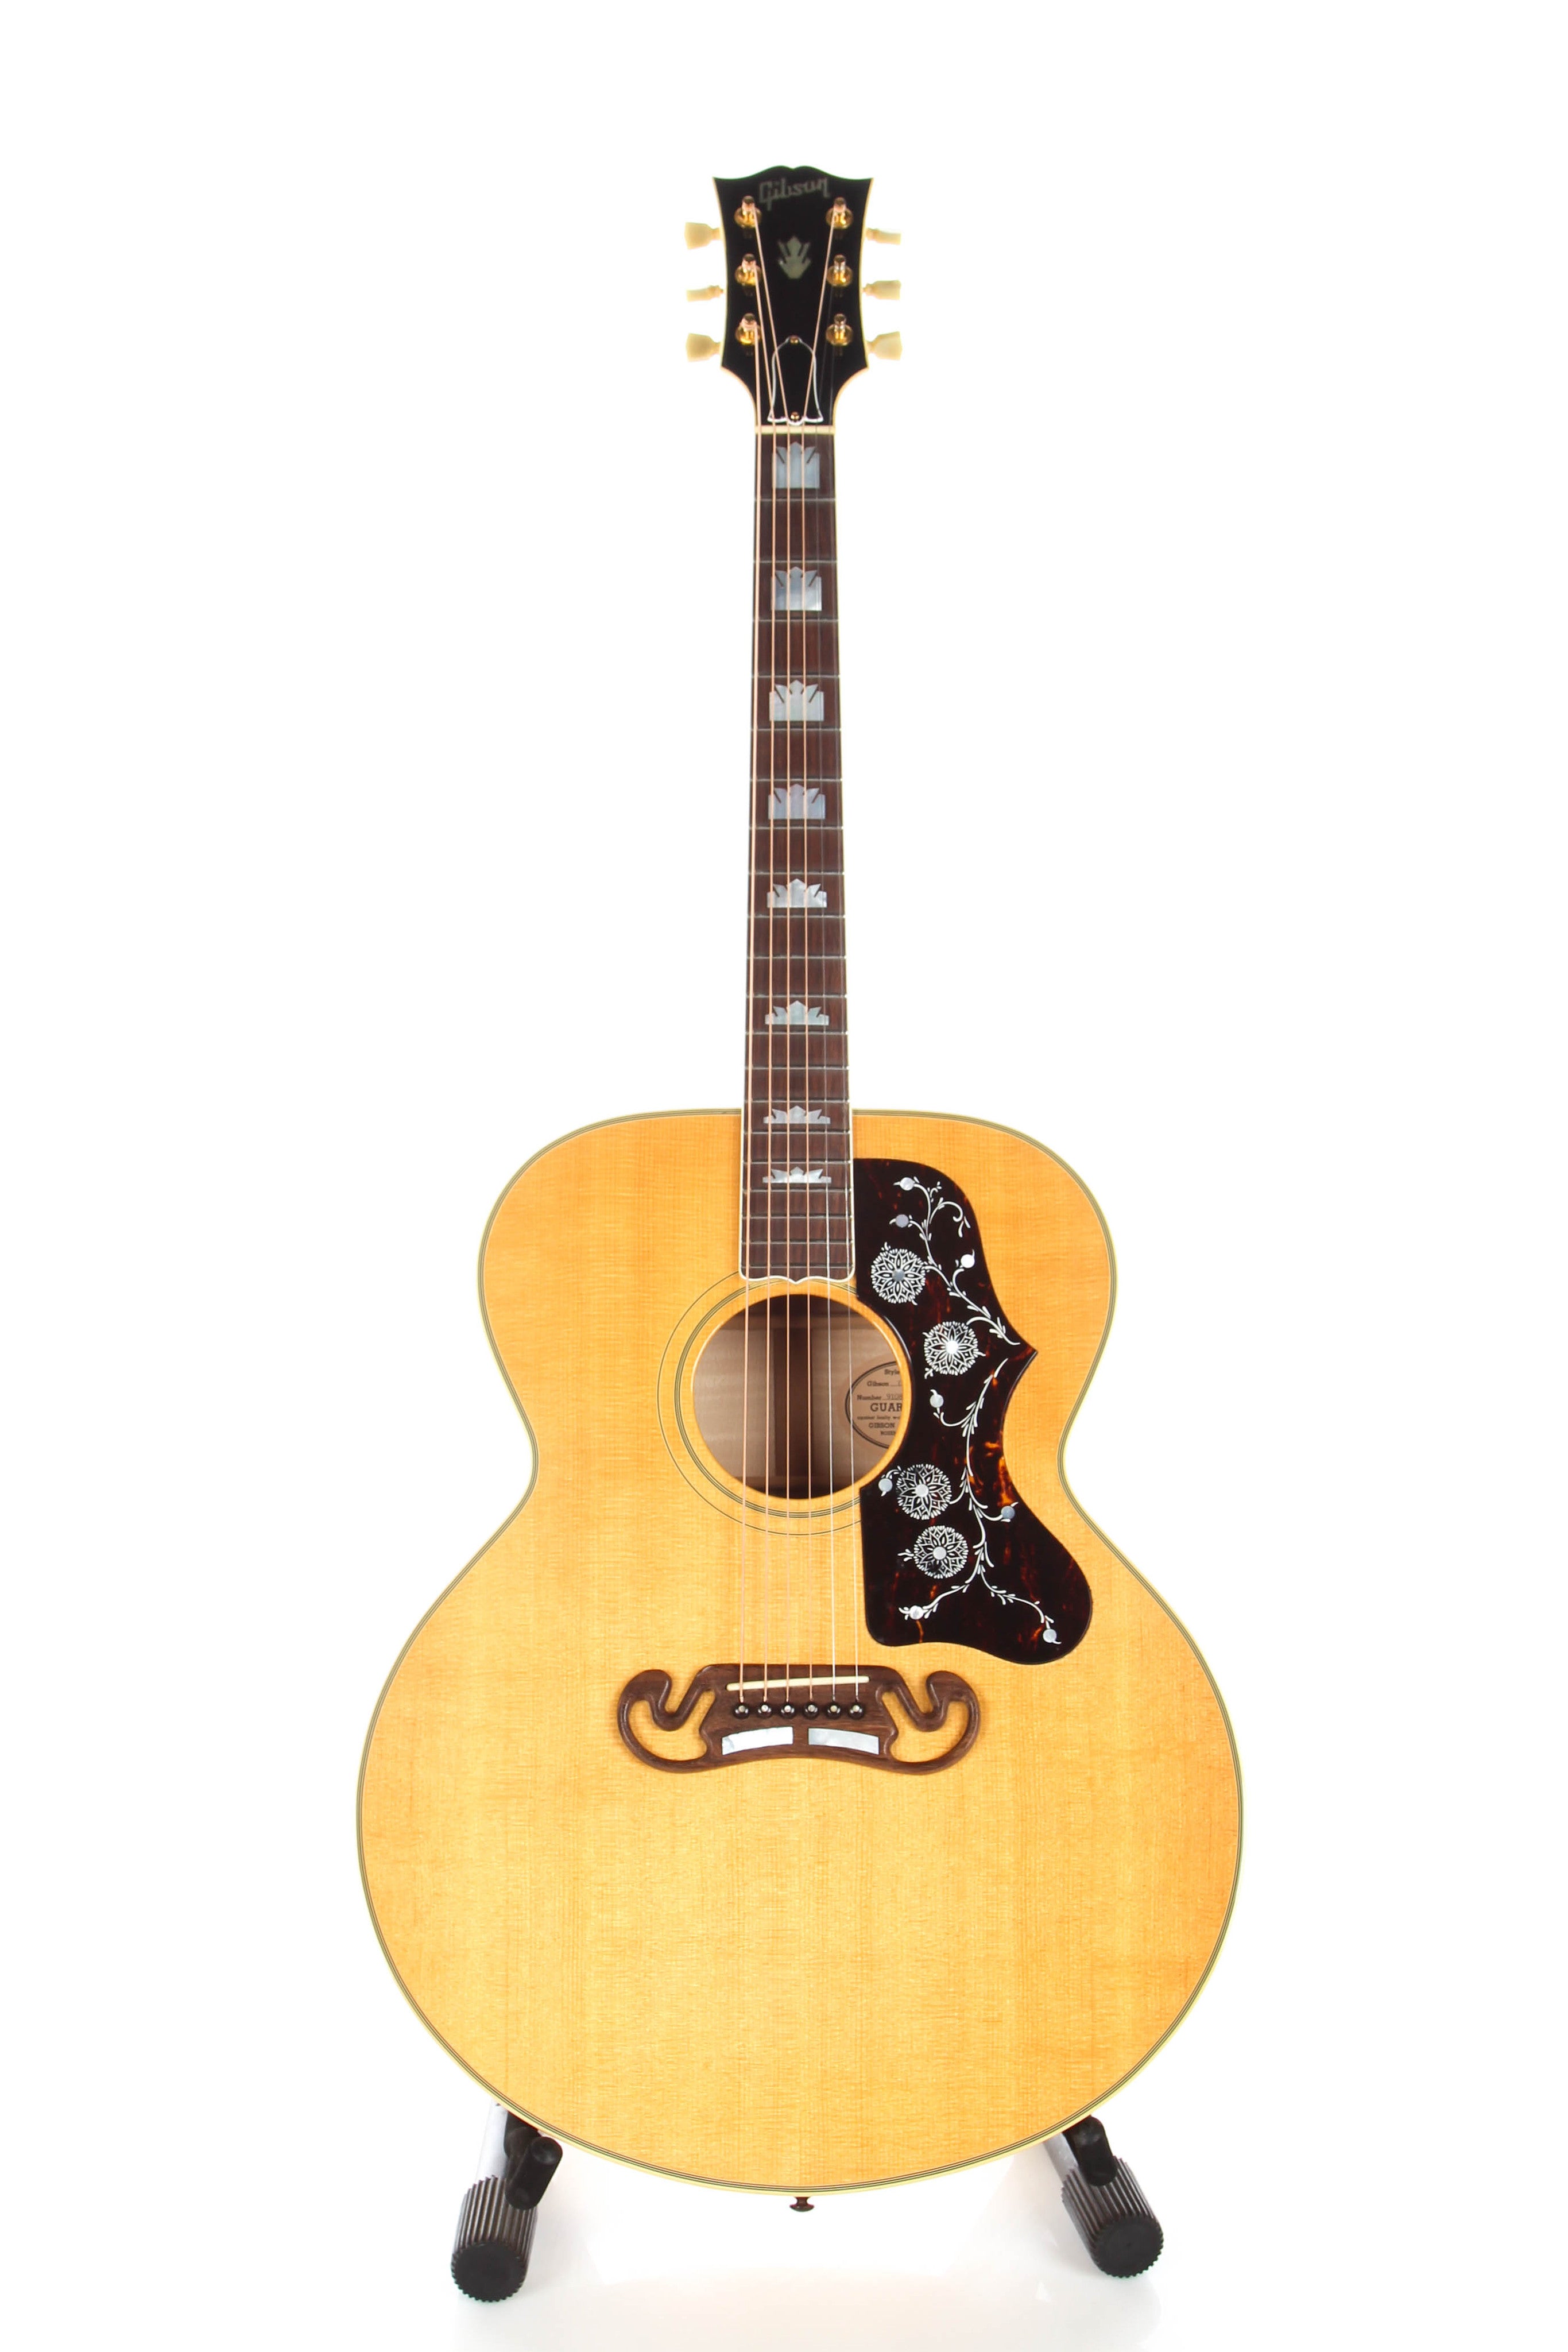 1991 Gibson J-200 Acoustic Guitar